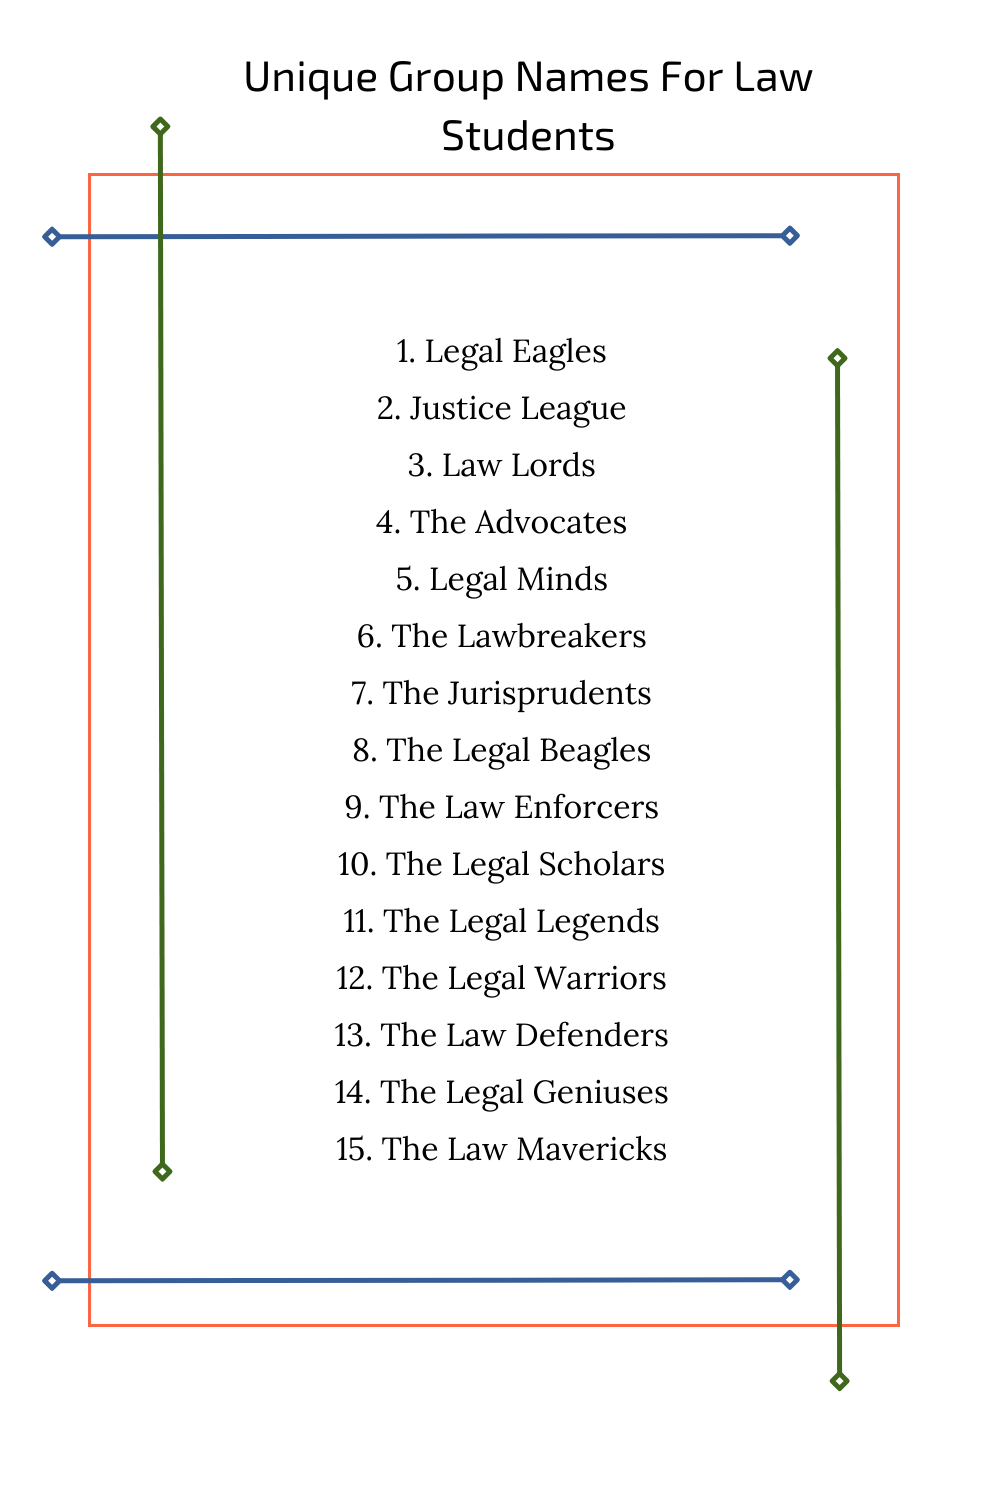 Unique Group Names For Law Students